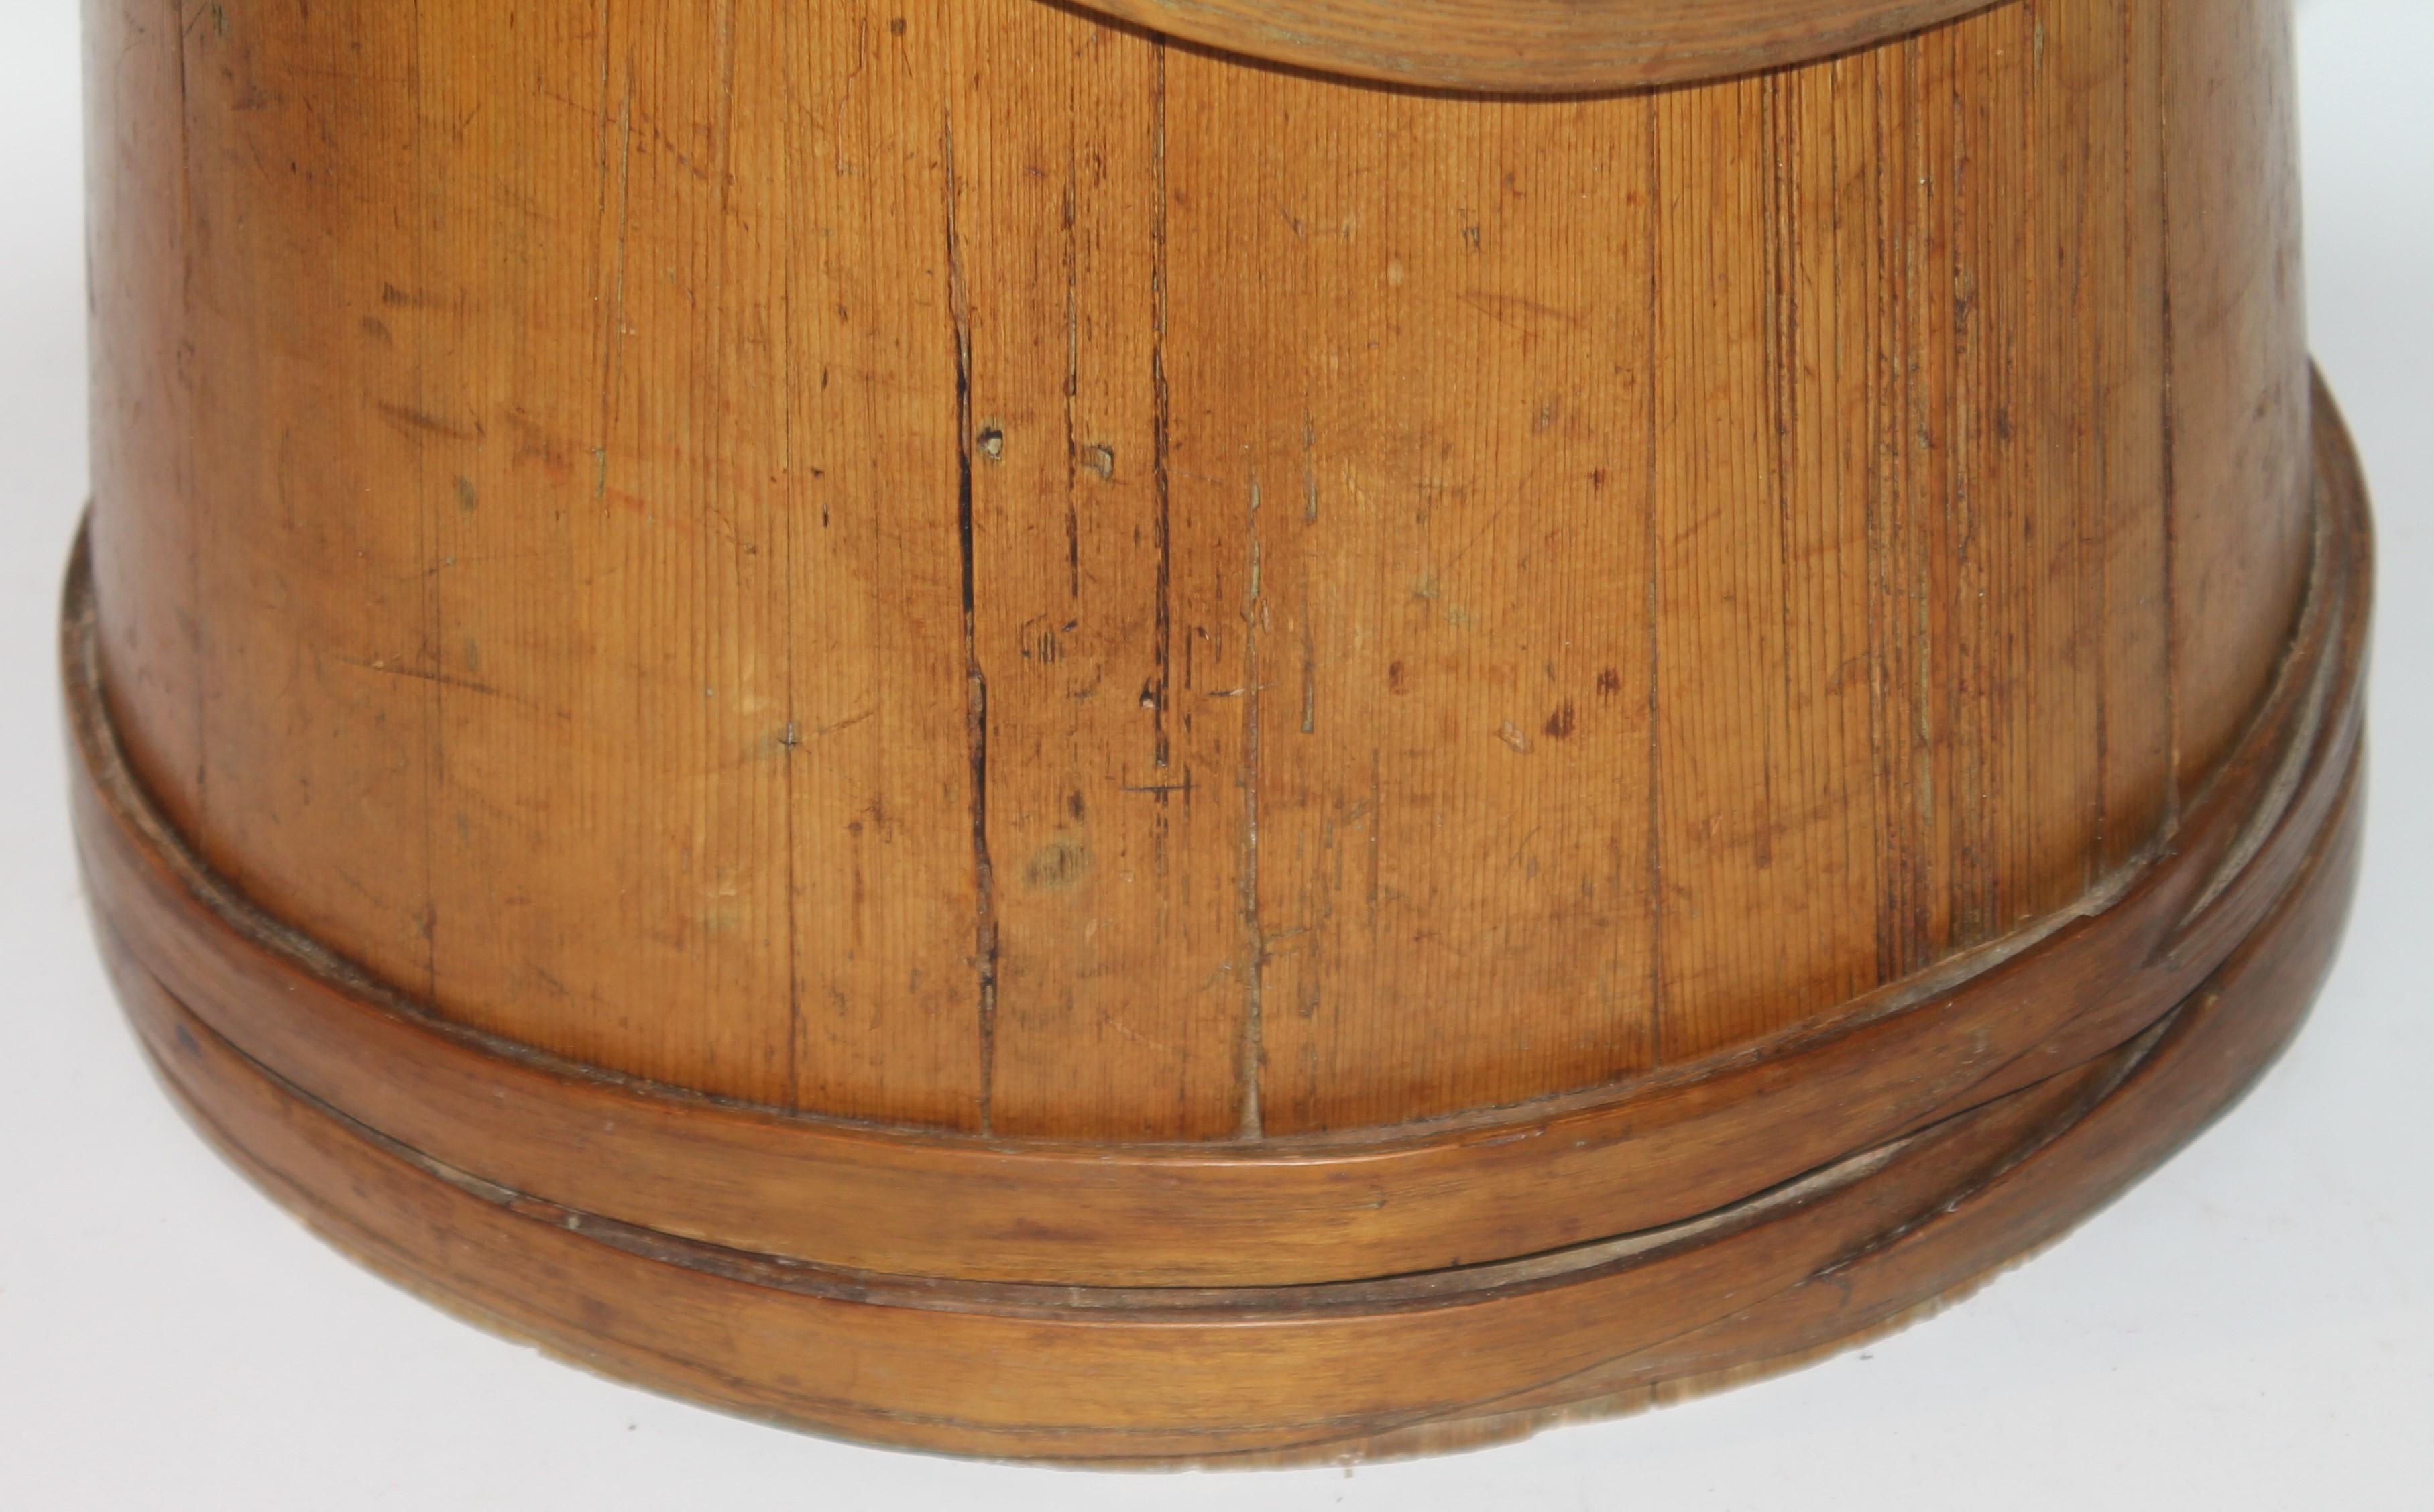 Adirondack 19th C Furkin Bucket with Lid from New England For Sale